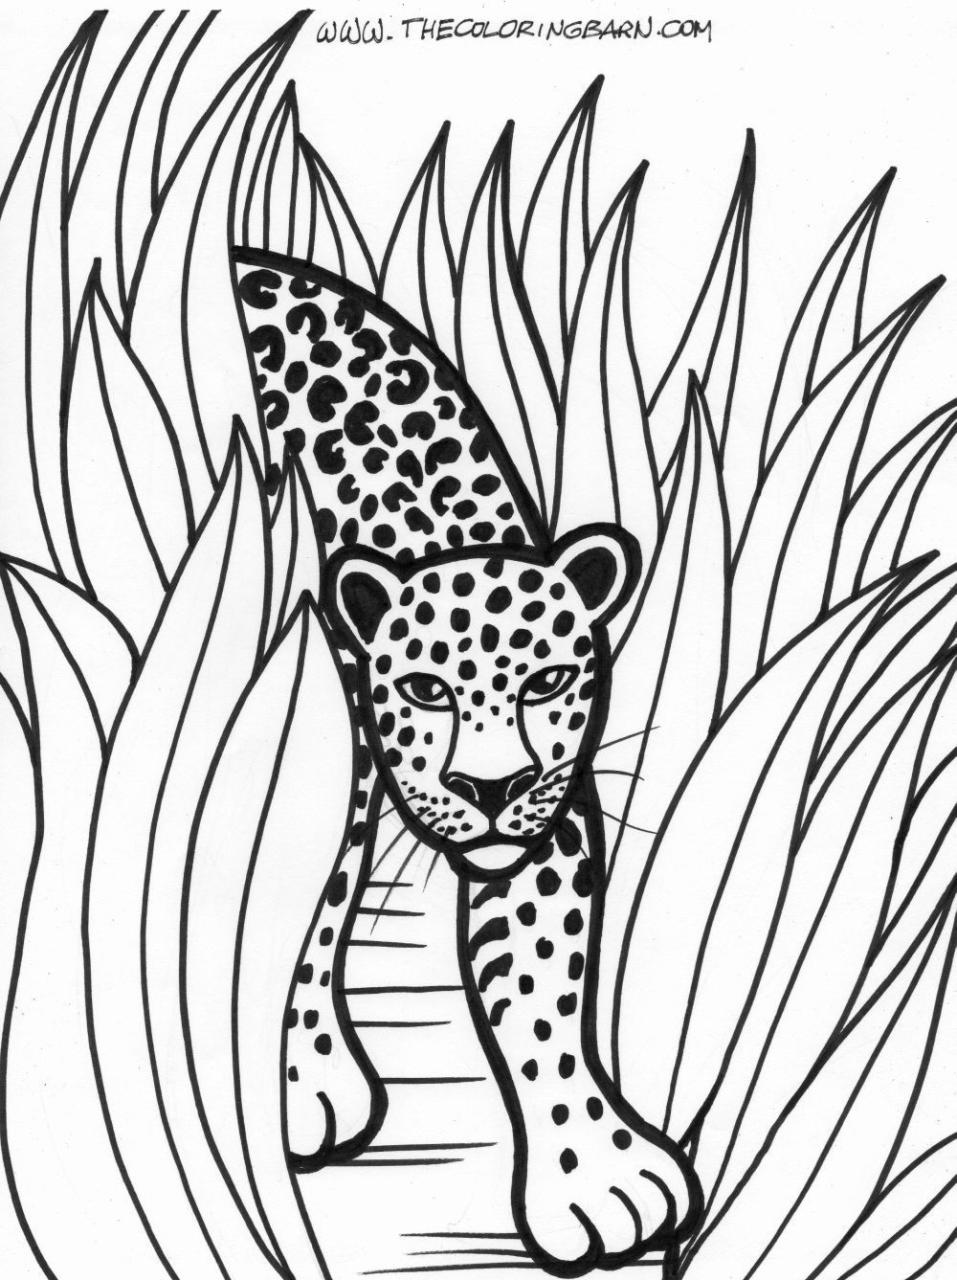 Ram Animal Kids Coloring Pages Coloring Pages For Kids Coloring